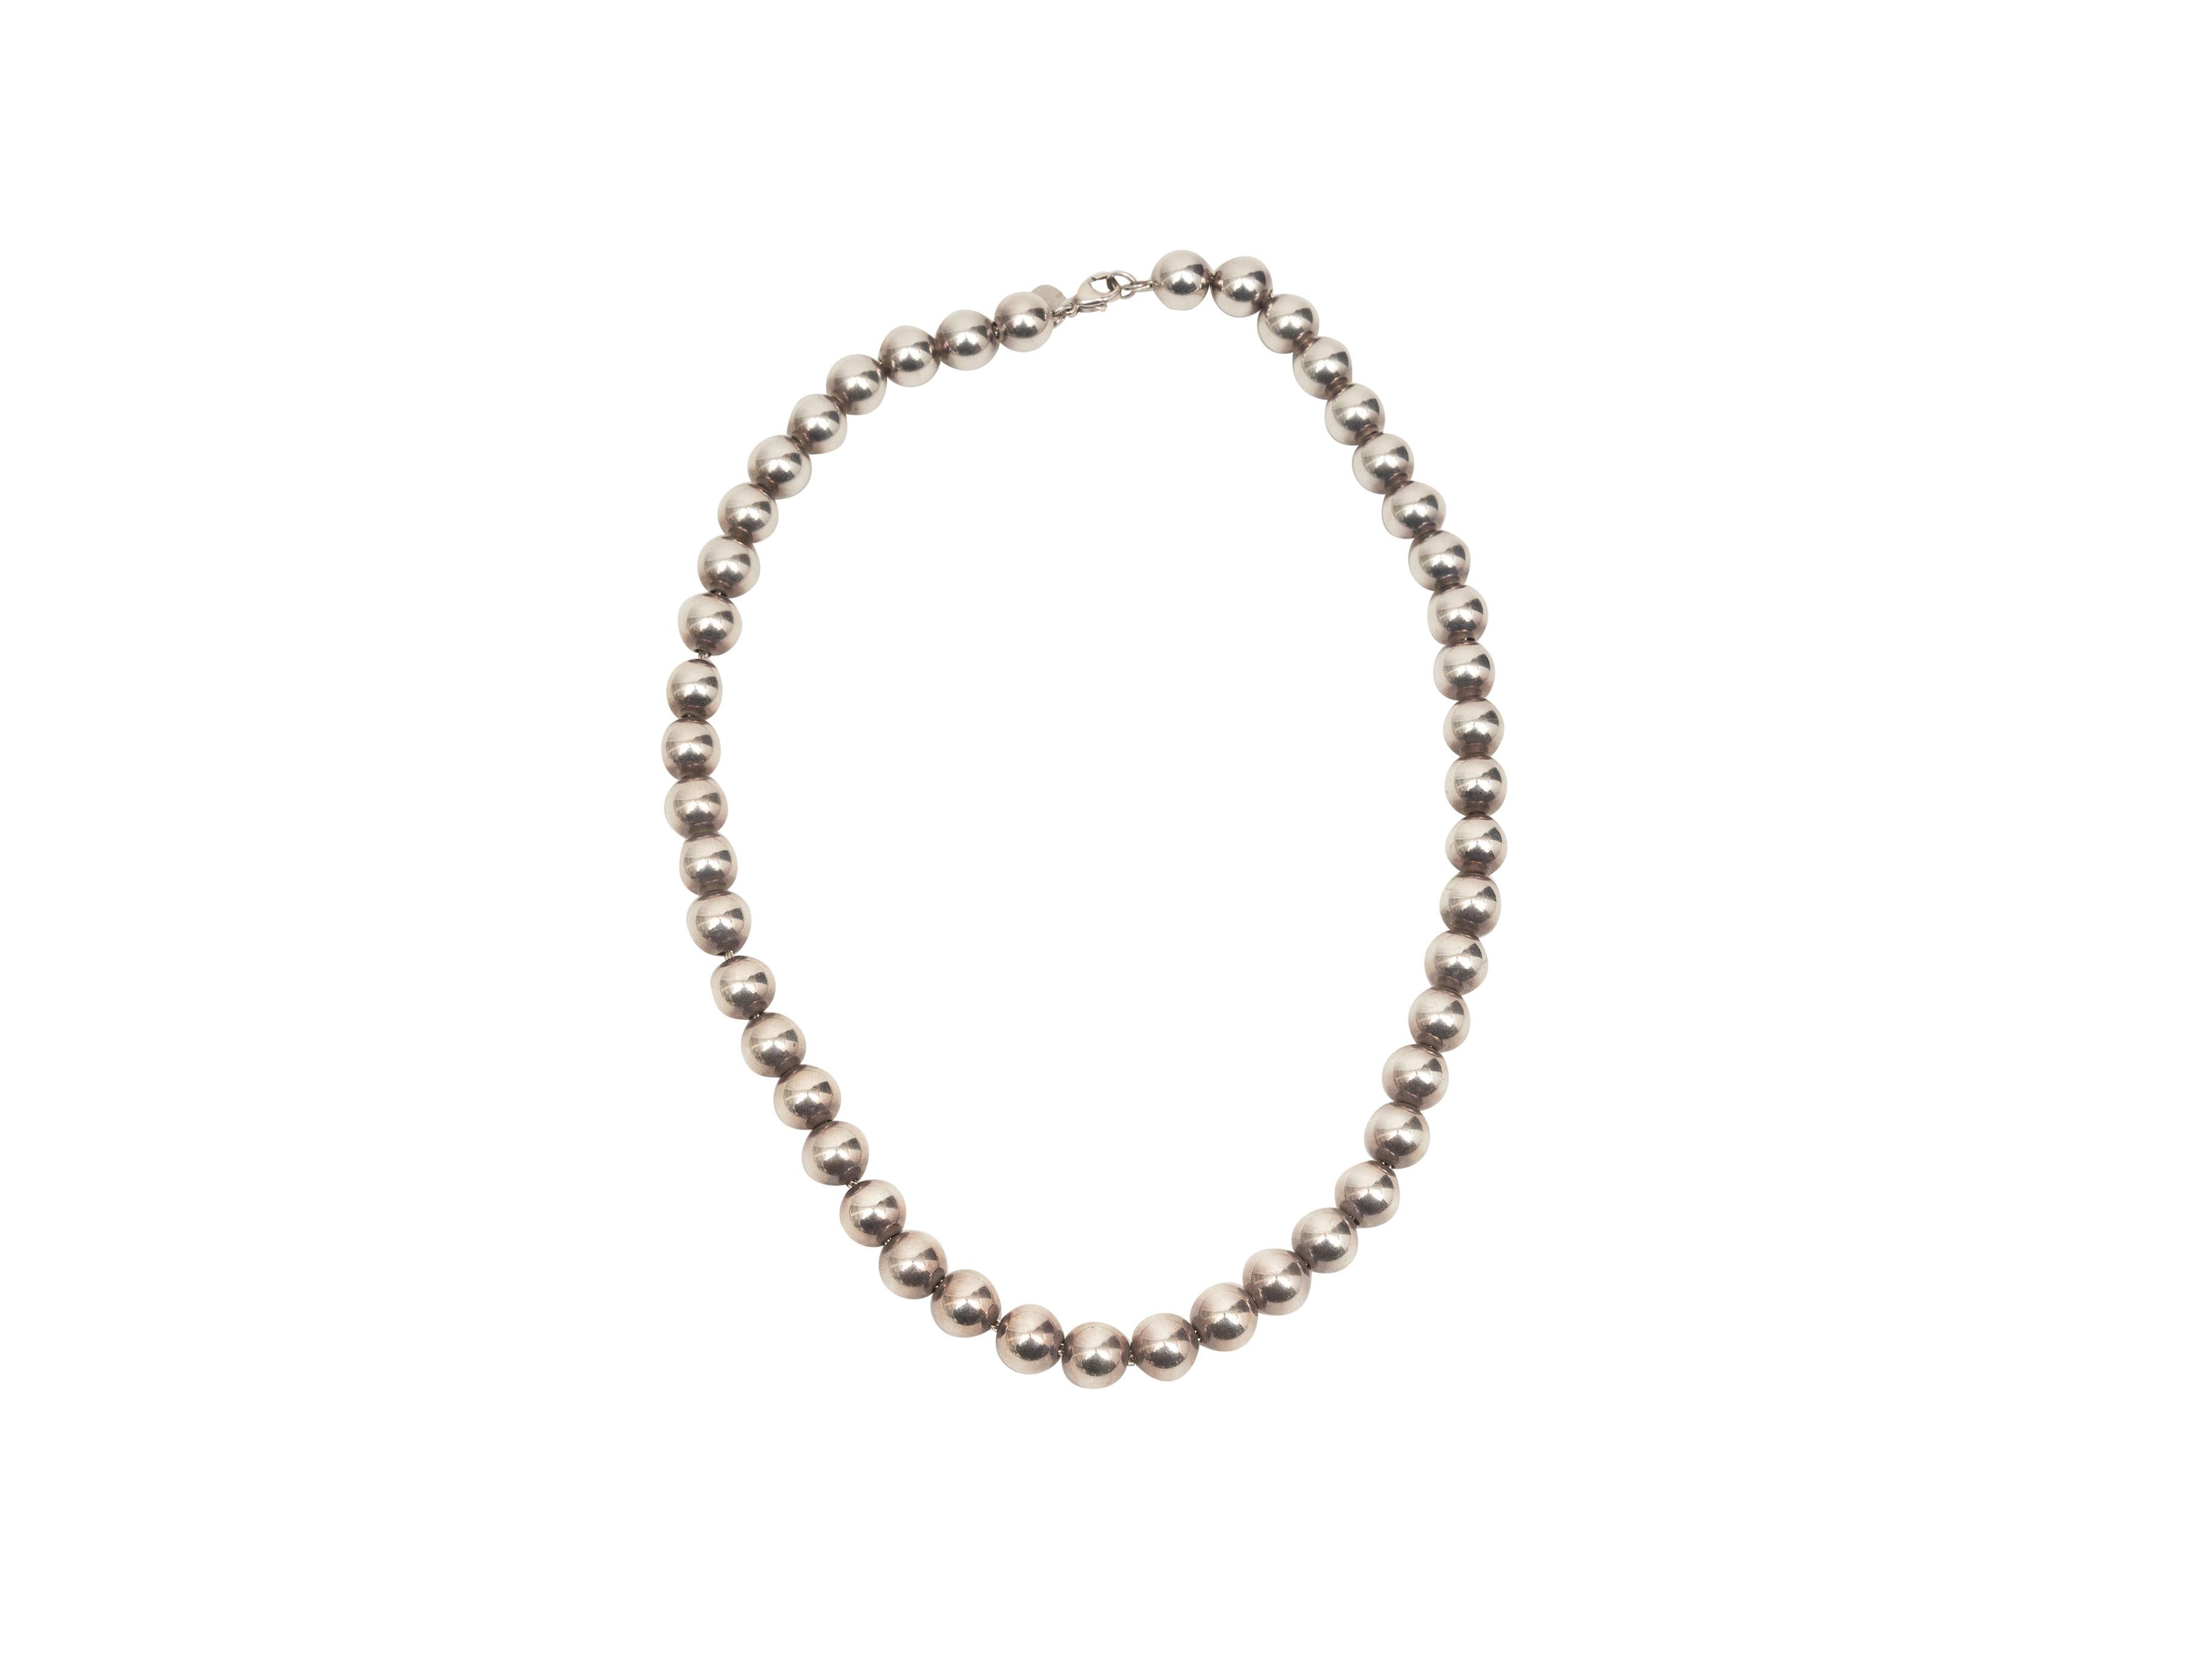 Product Details: Sterling silver short ball necklace by Tiffany & Co. 8.5